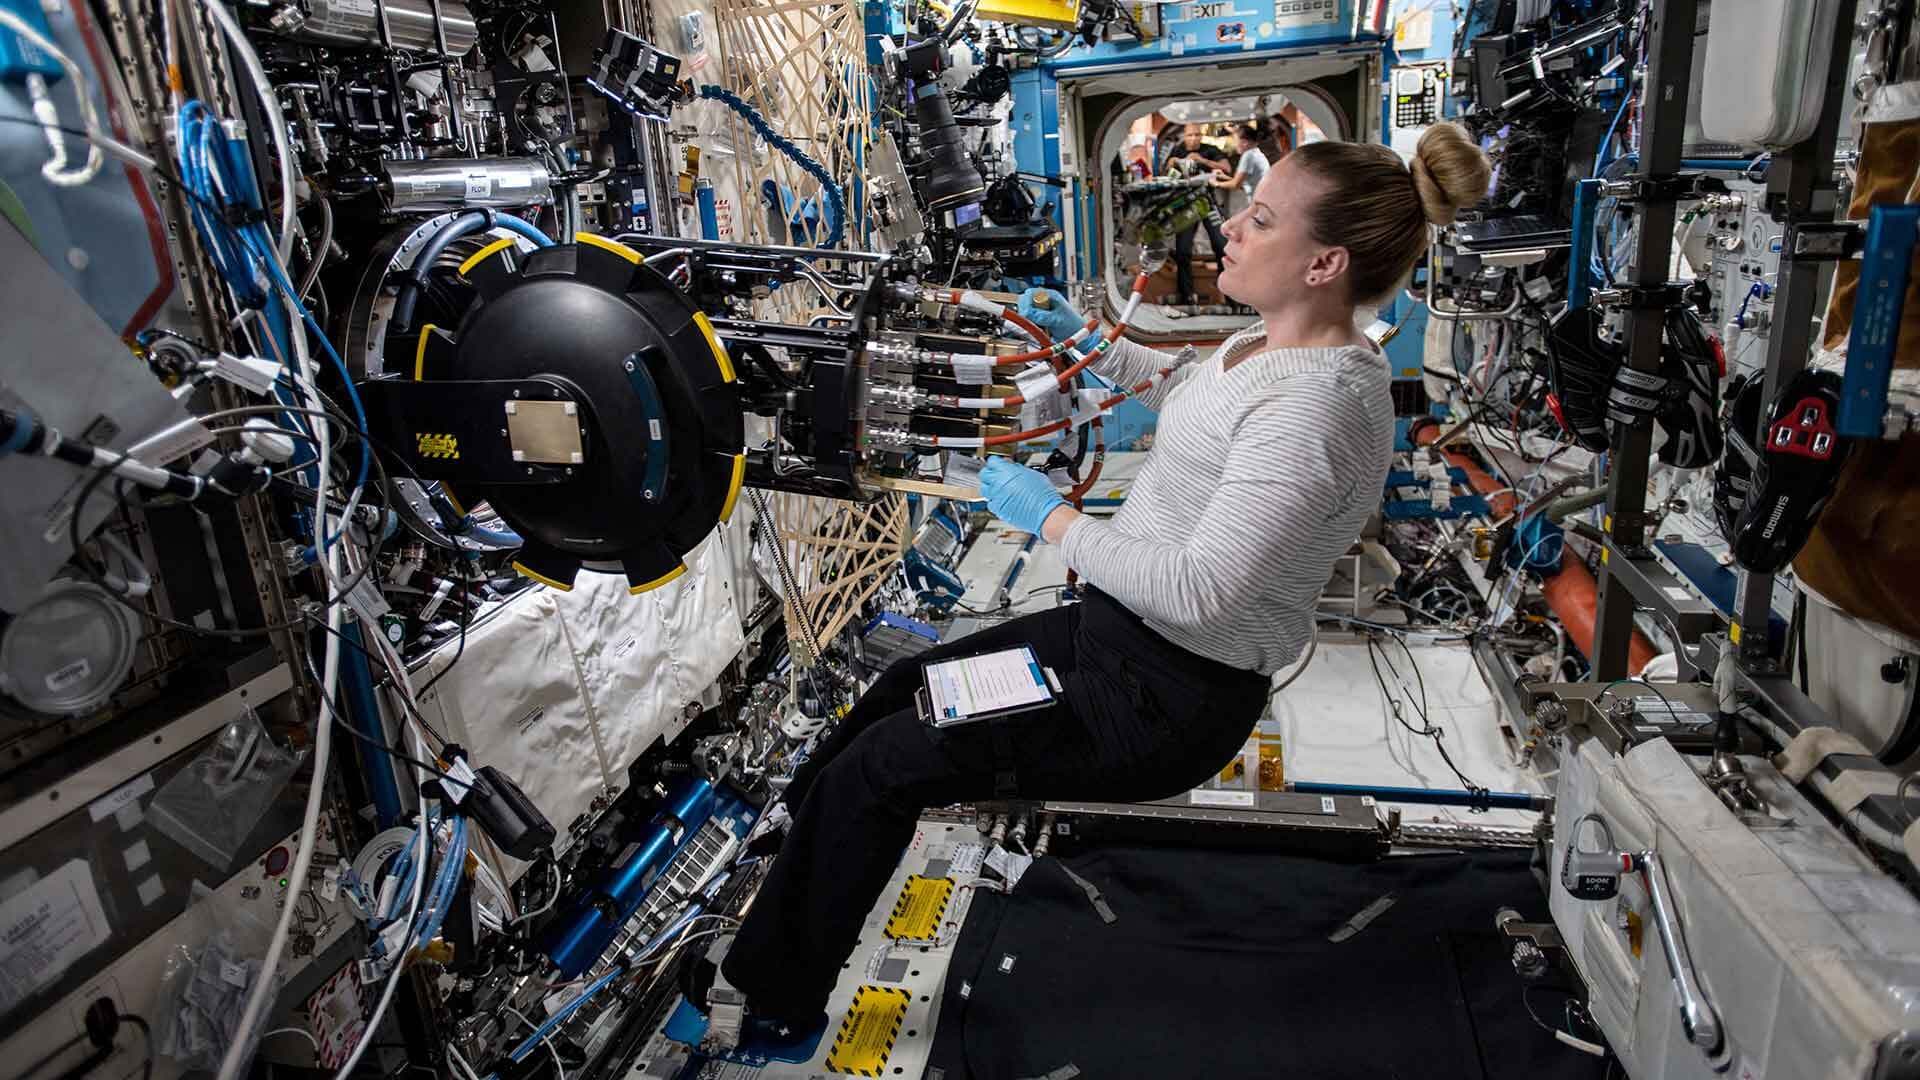 ISS astronaut works on combustion experiment equipment